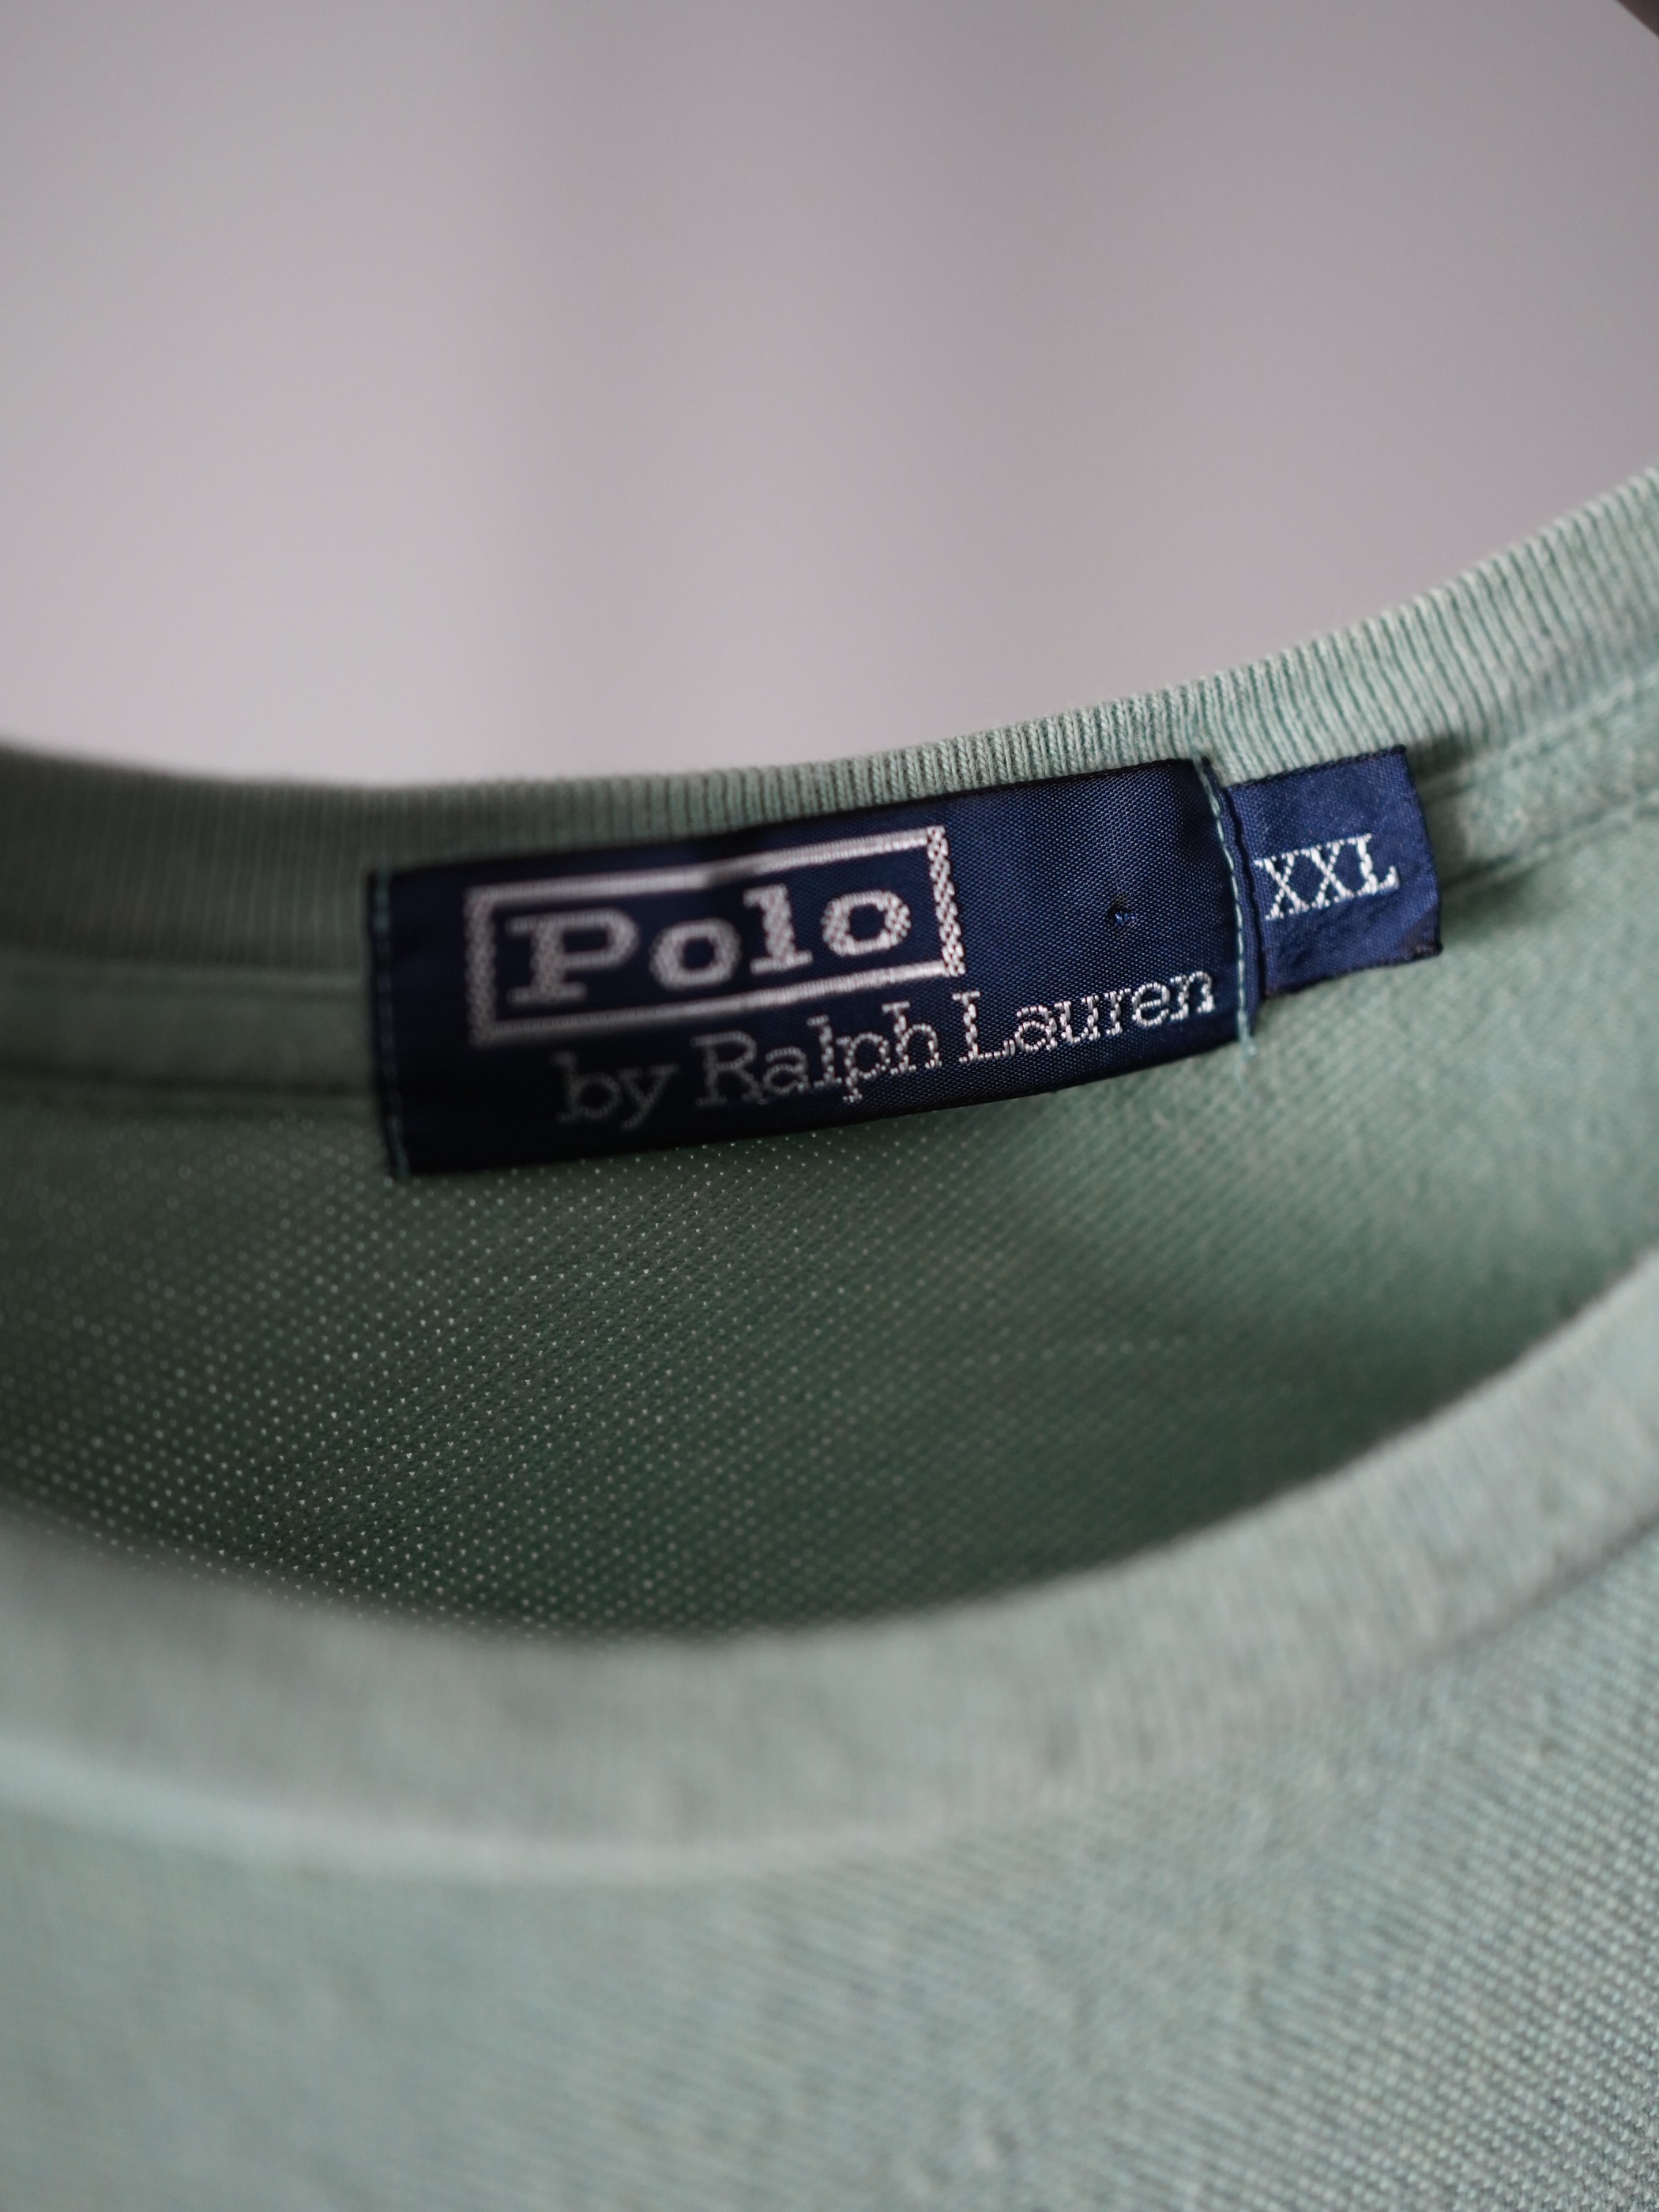 1990's Polo by Ralph Lauren 鹿の子 T-shirts